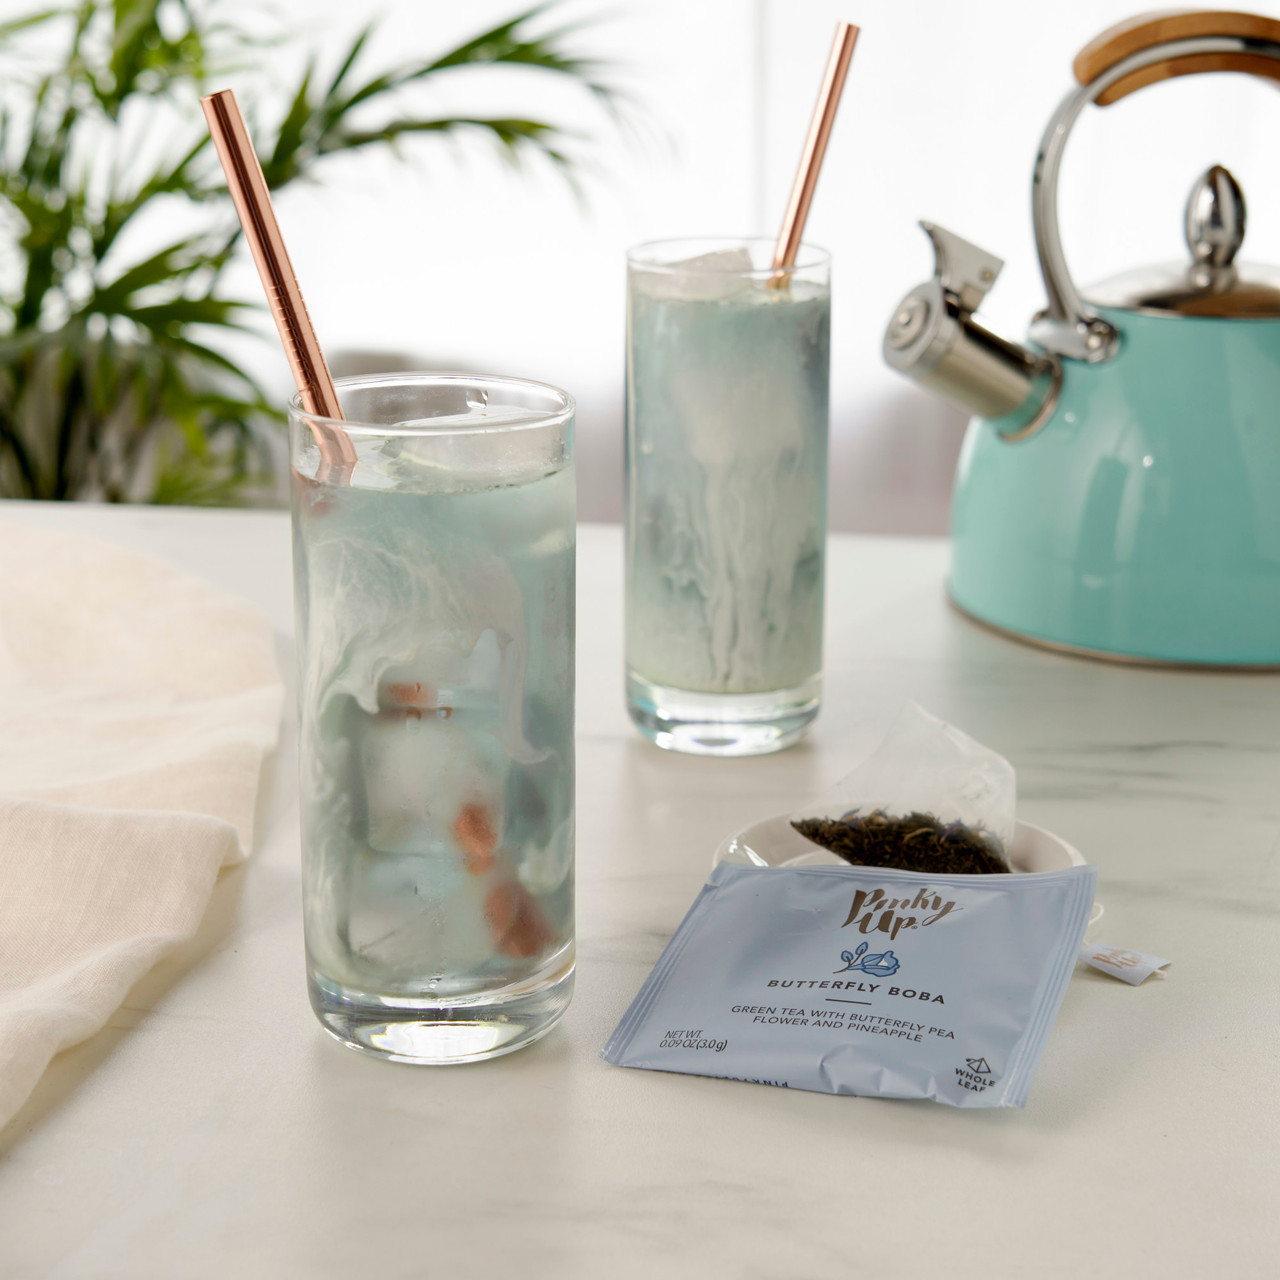 Butterfly Boba Tea In Sachets by Pinky Up